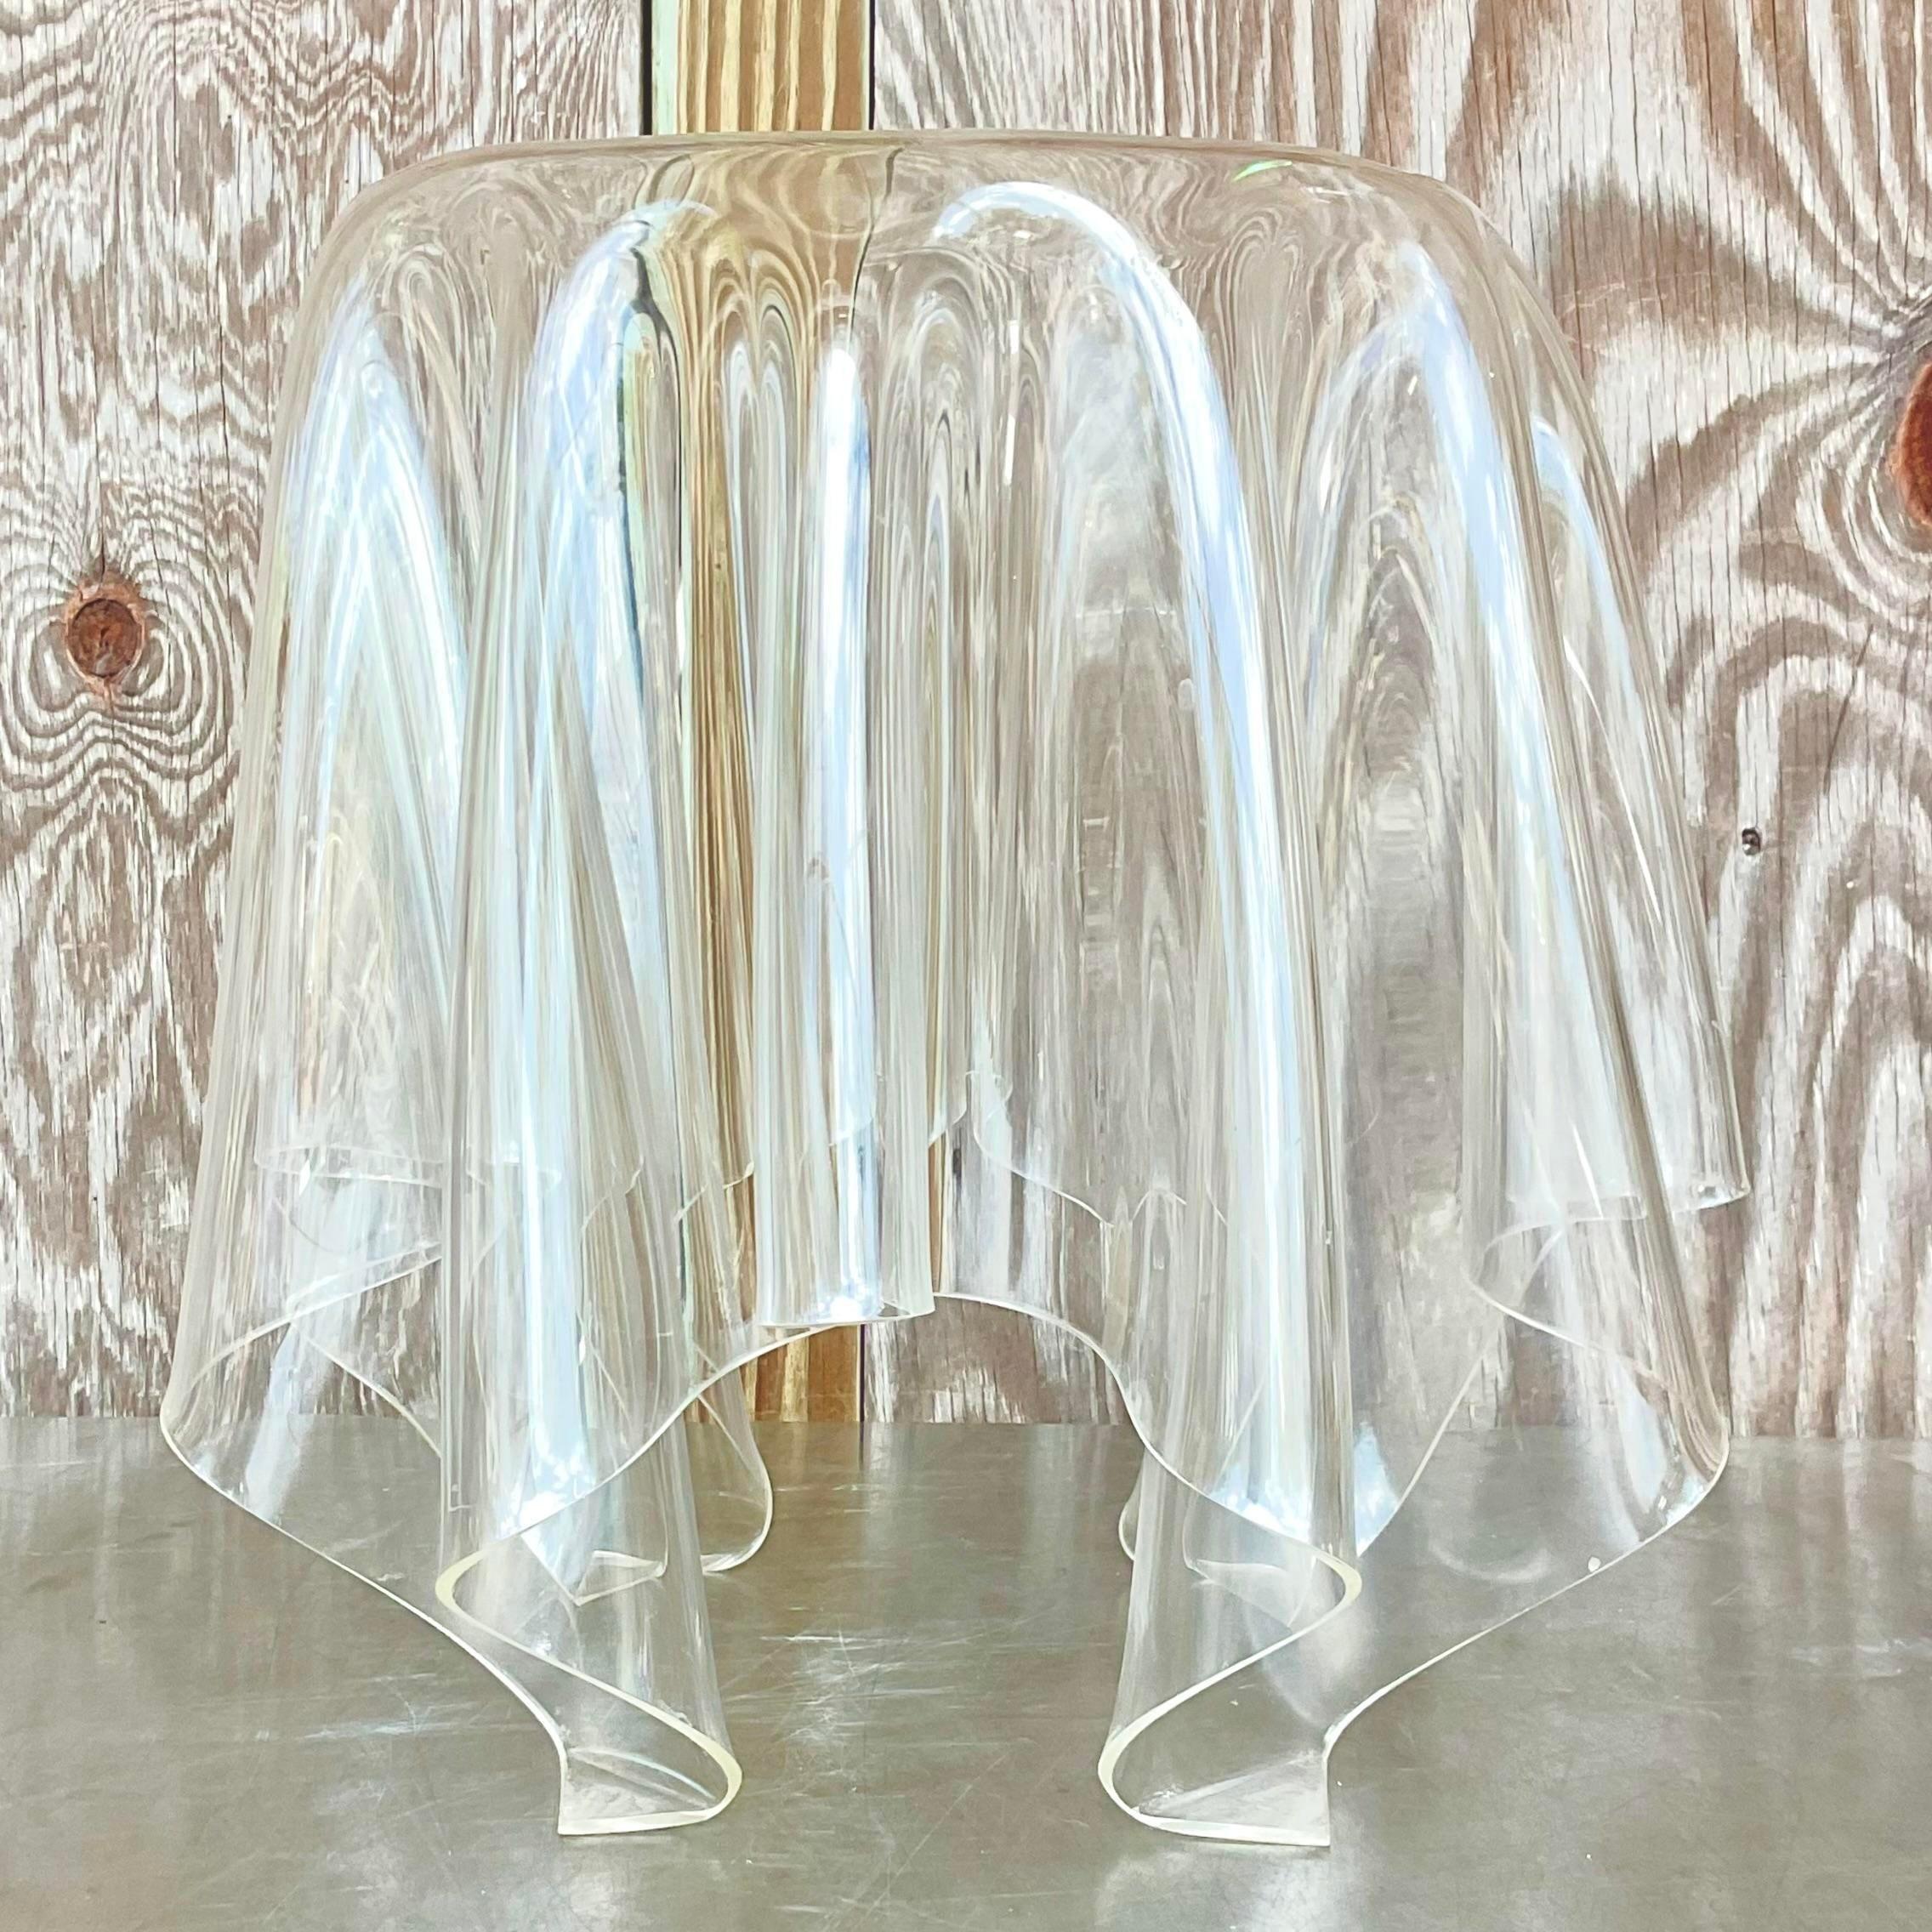 Late 20th Century Vintage Boho Molded Lucite Side Tables - a Pair In Good Condition For Sale In west palm beach, FL